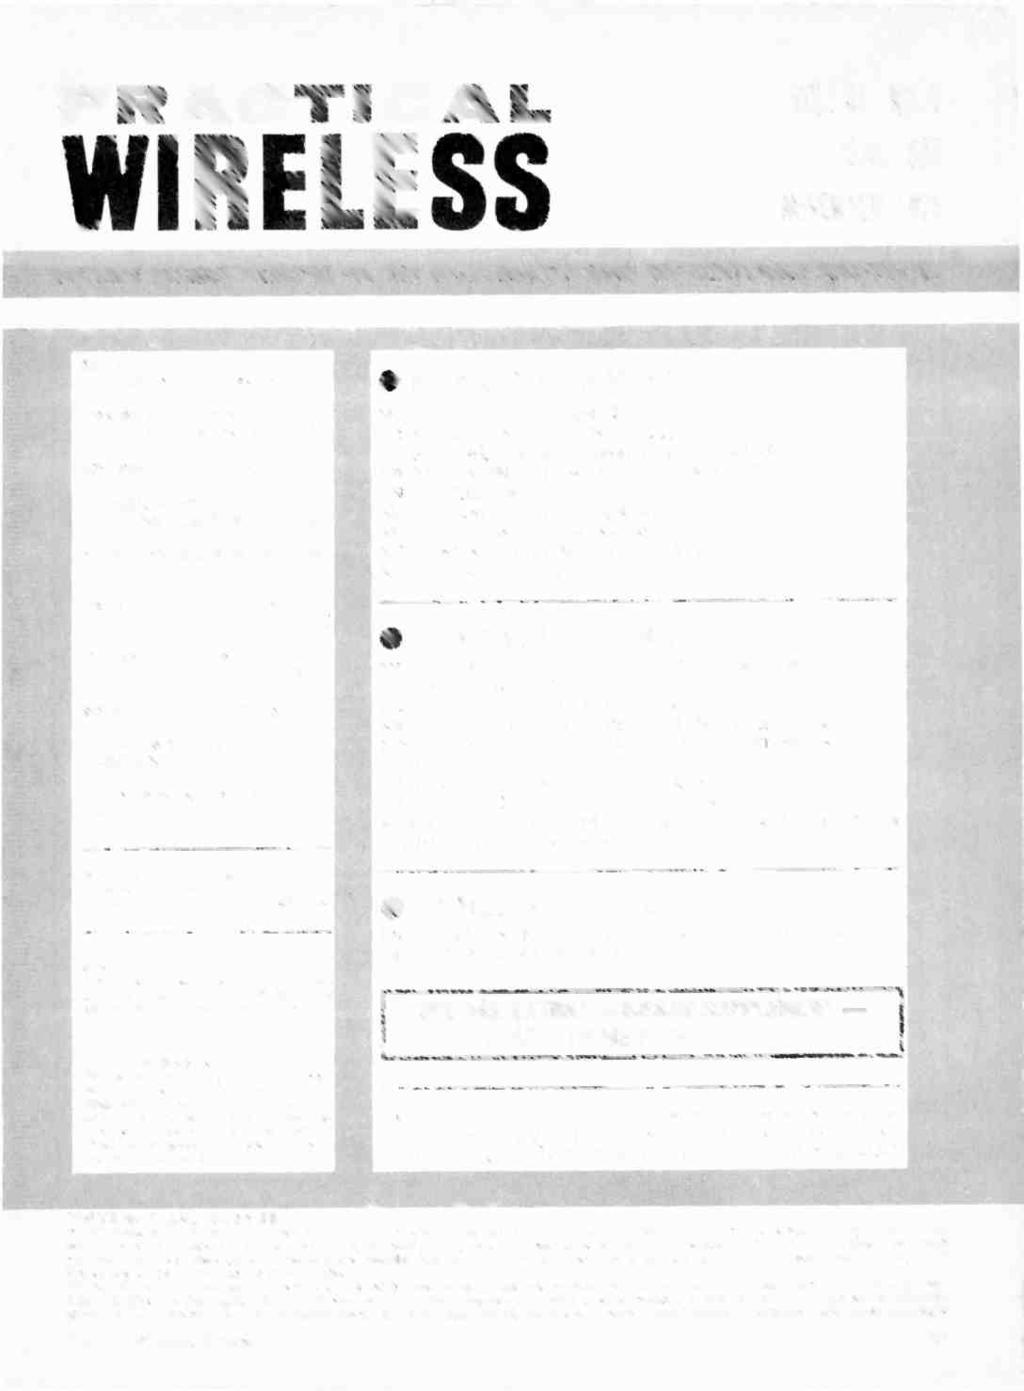 PRACTICAL VOL 51 NO.7 WIRELESS ISSUE 825 NOVEMBER 1975 BRITAIN'S PREMIER MAGAZINE FOR THE DO-IT-YOURSELF RADIO AND ELECTRONICS CONSTRUCTOR EDITOR Lionel E.